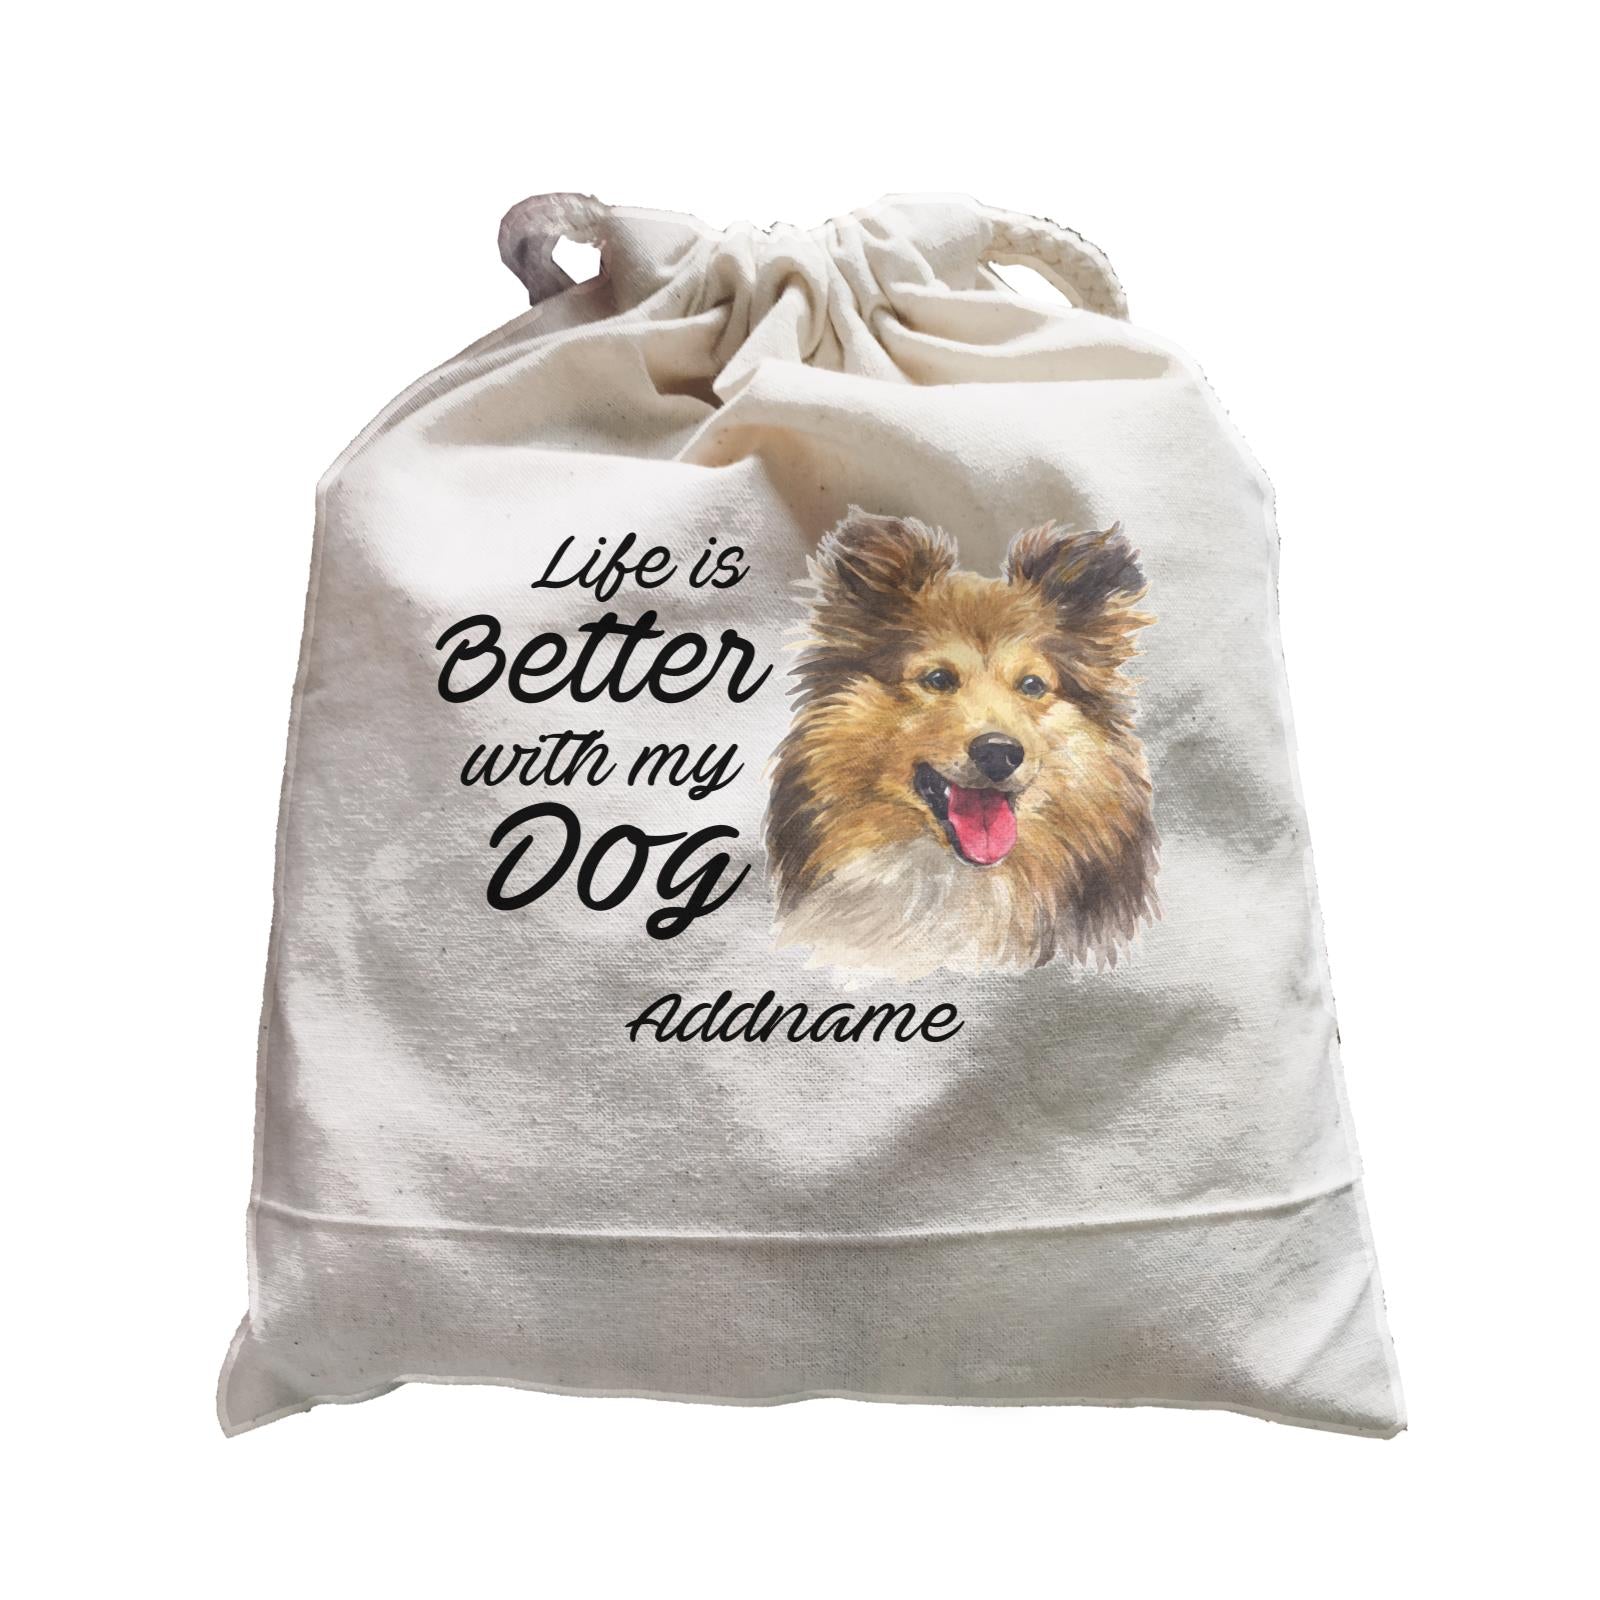 Watercolor Life is Better With My Dog Shetland Sheepdog Addname Satchel